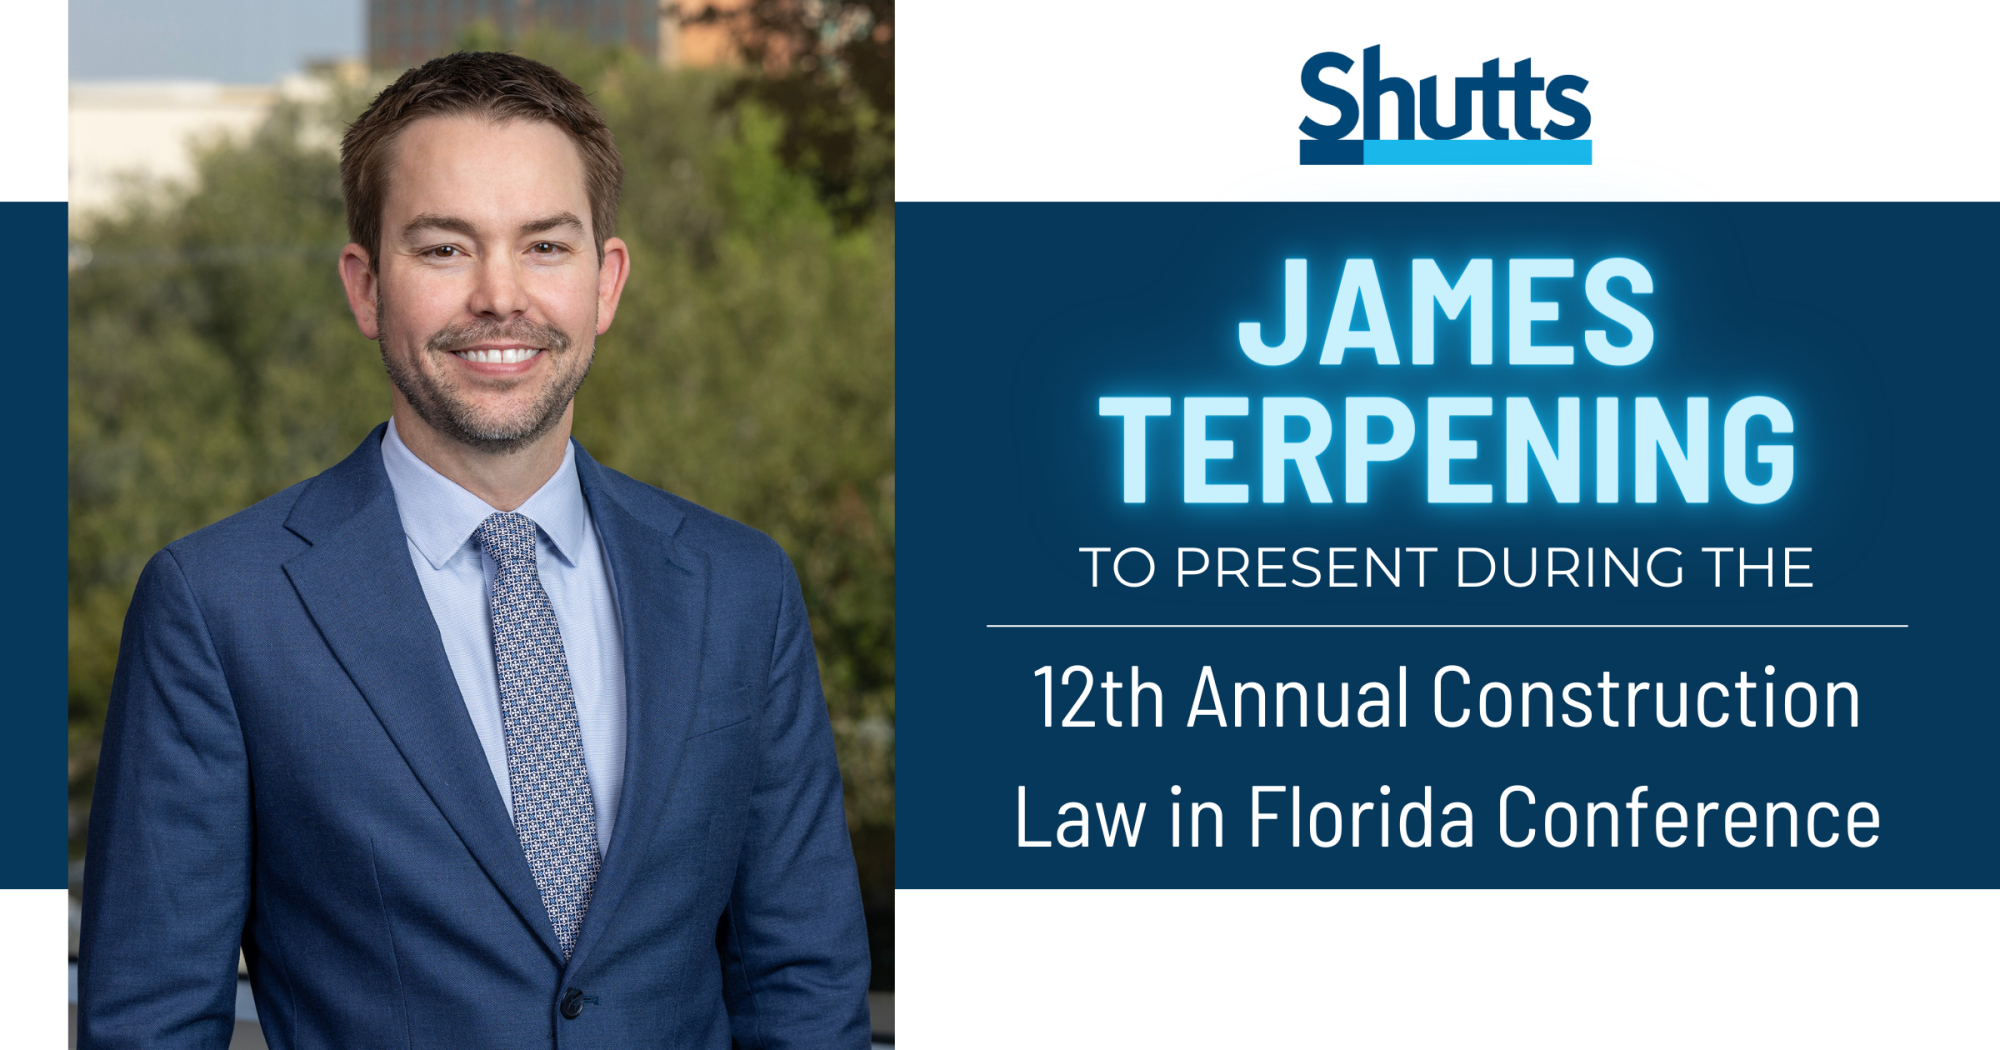 James Terpening to Present During 12th Annual Construction Law in Florida Conference